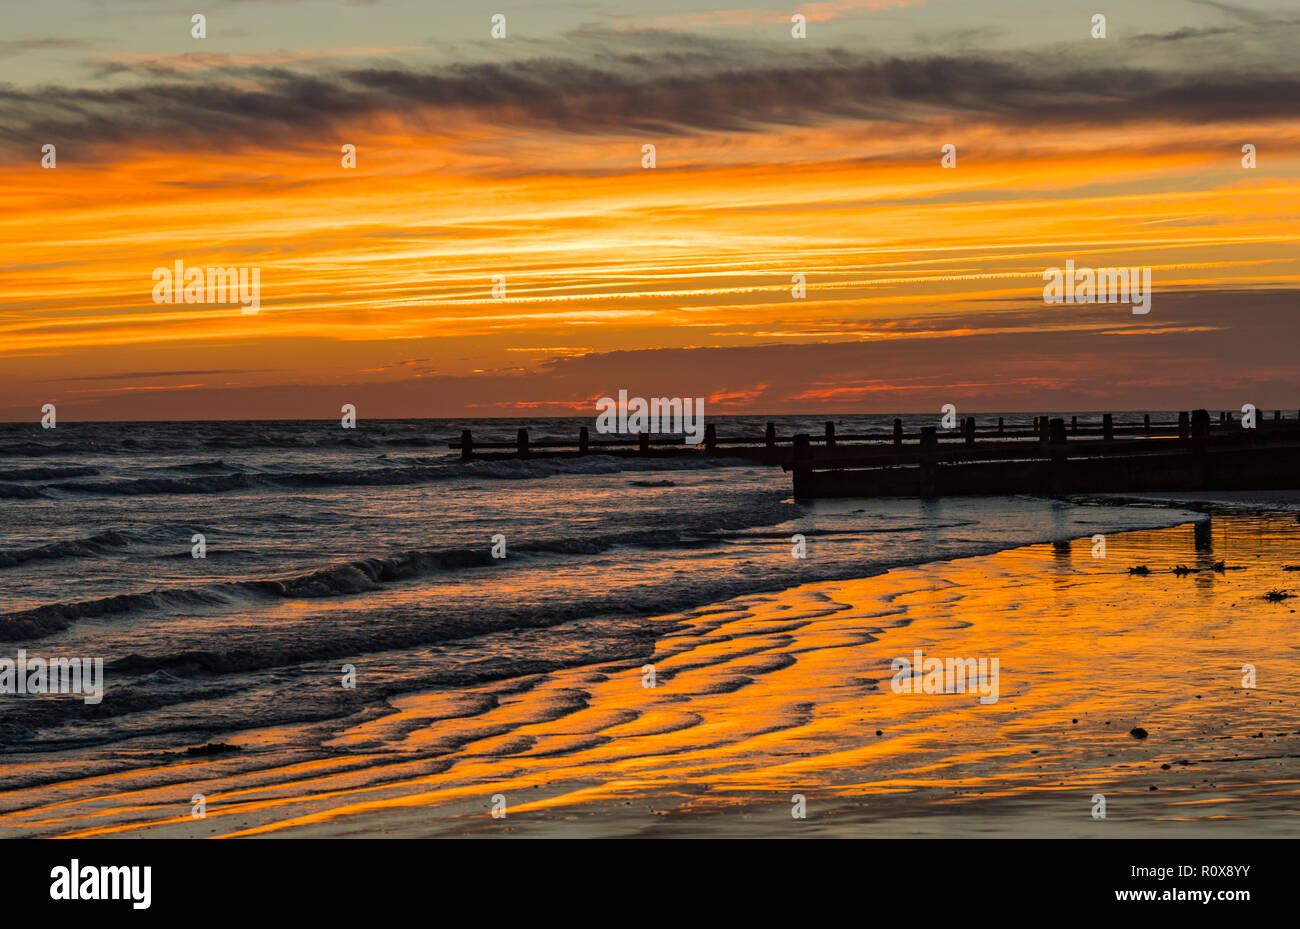 Evening sky after sunset with orange and red sky reflecting in sand ridges by the sea in West Sussex, UK. Stock Photo